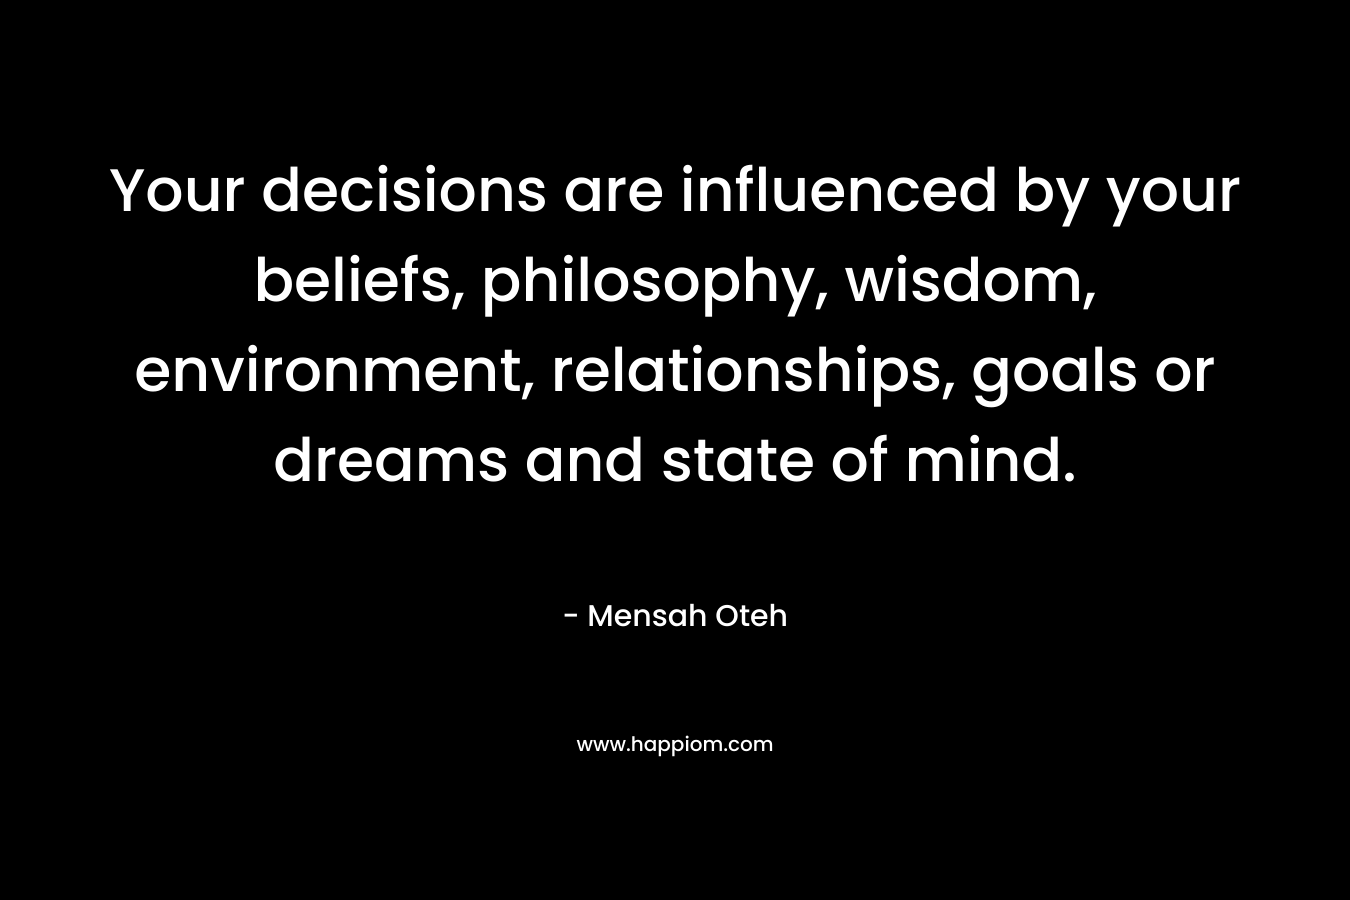 Your decisions are influenced by your beliefs, philosophy, wisdom, environment, relationships, goals or dreams and state of mind.